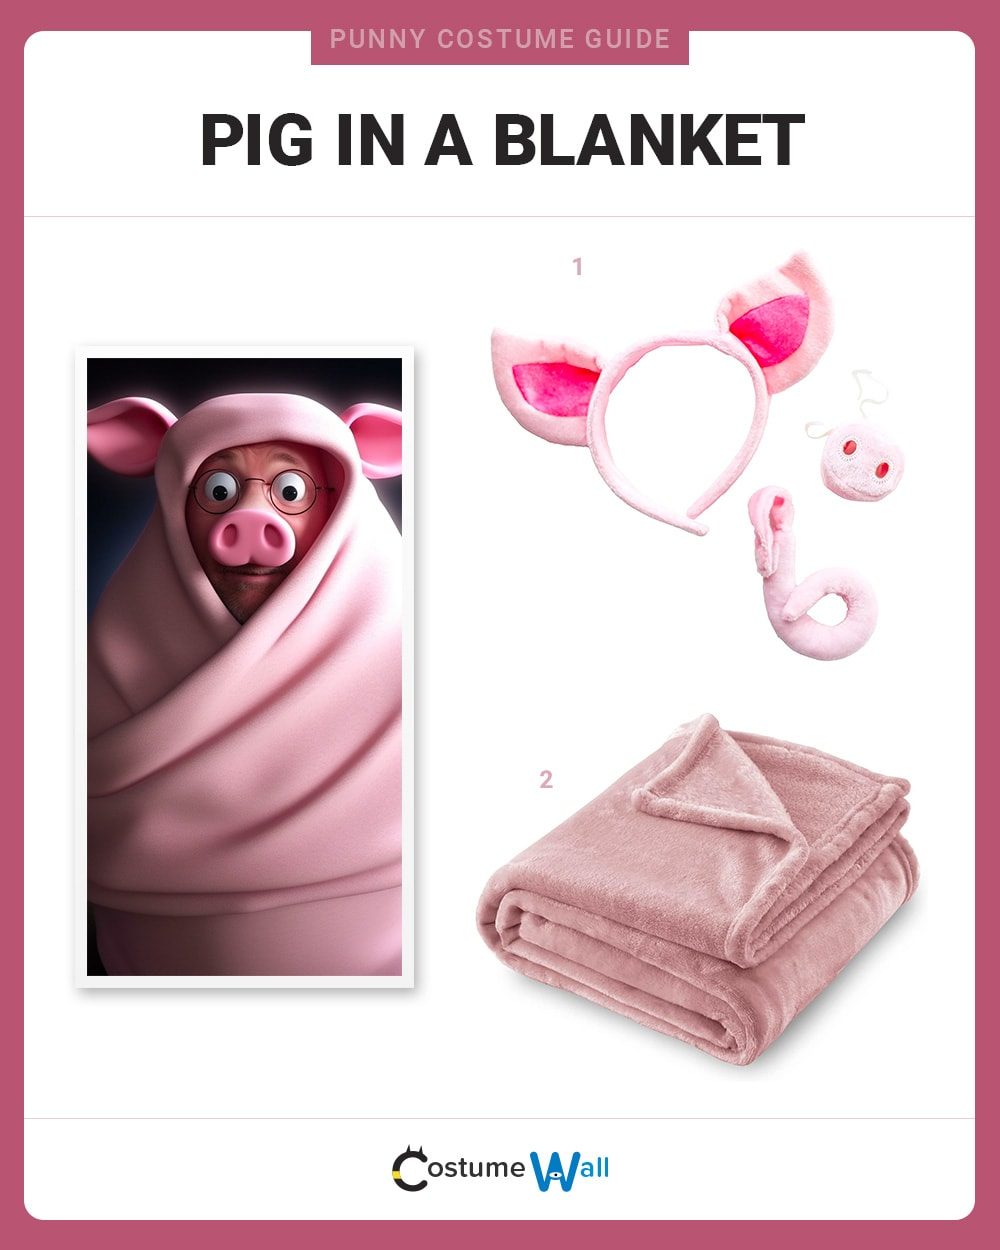 Pig in a Blanket Costume Guide